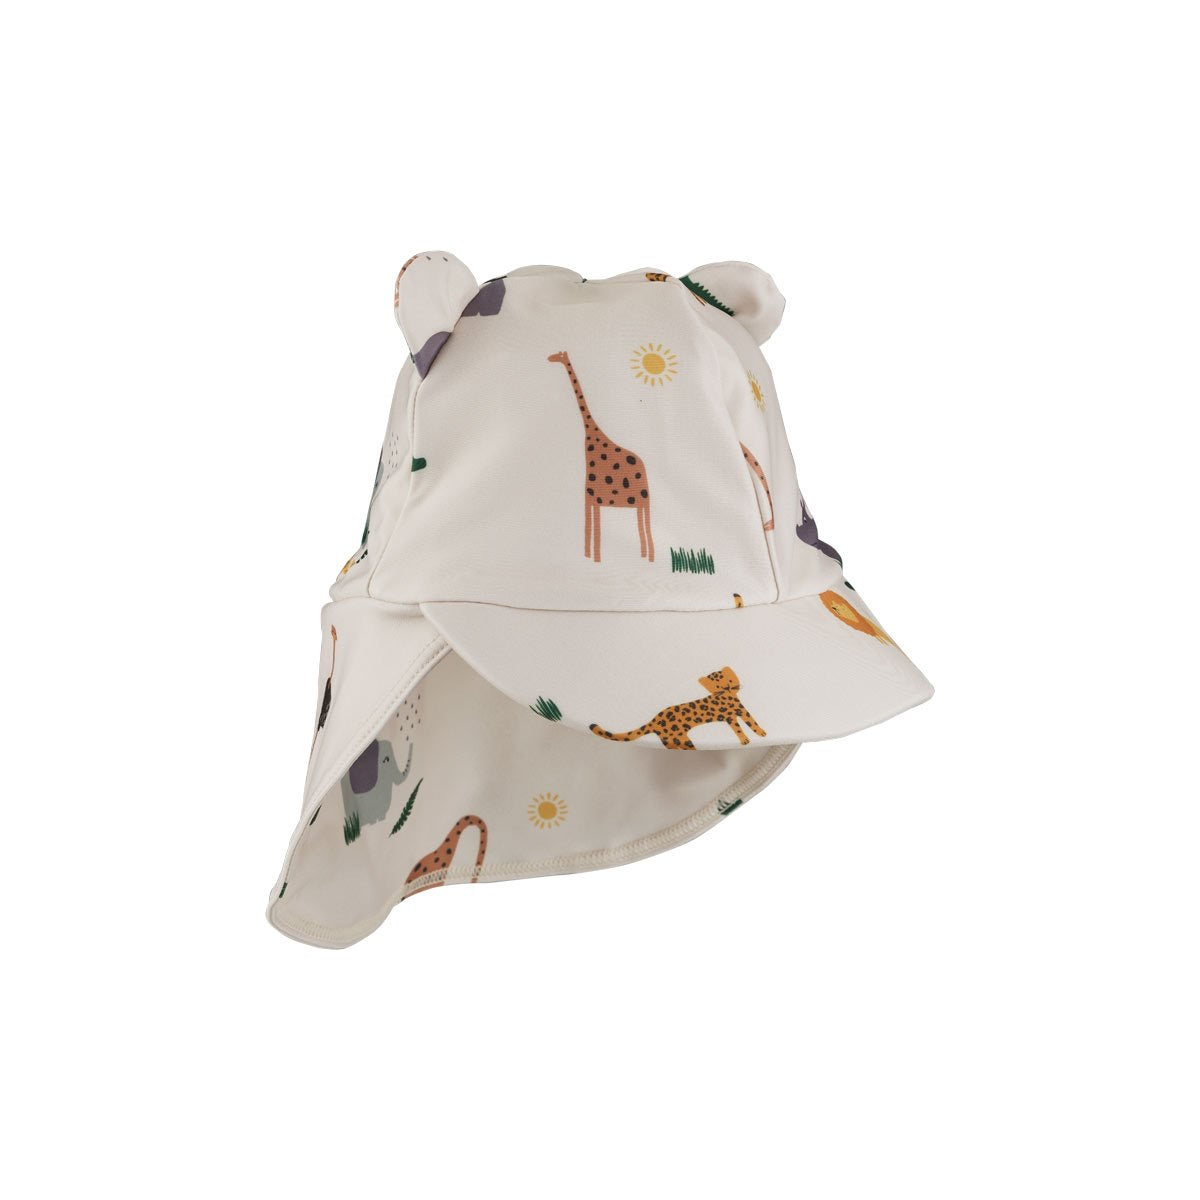 The Liewood Senia Sun Hat in the safari print is available from Alf & Co, the children’s independent 